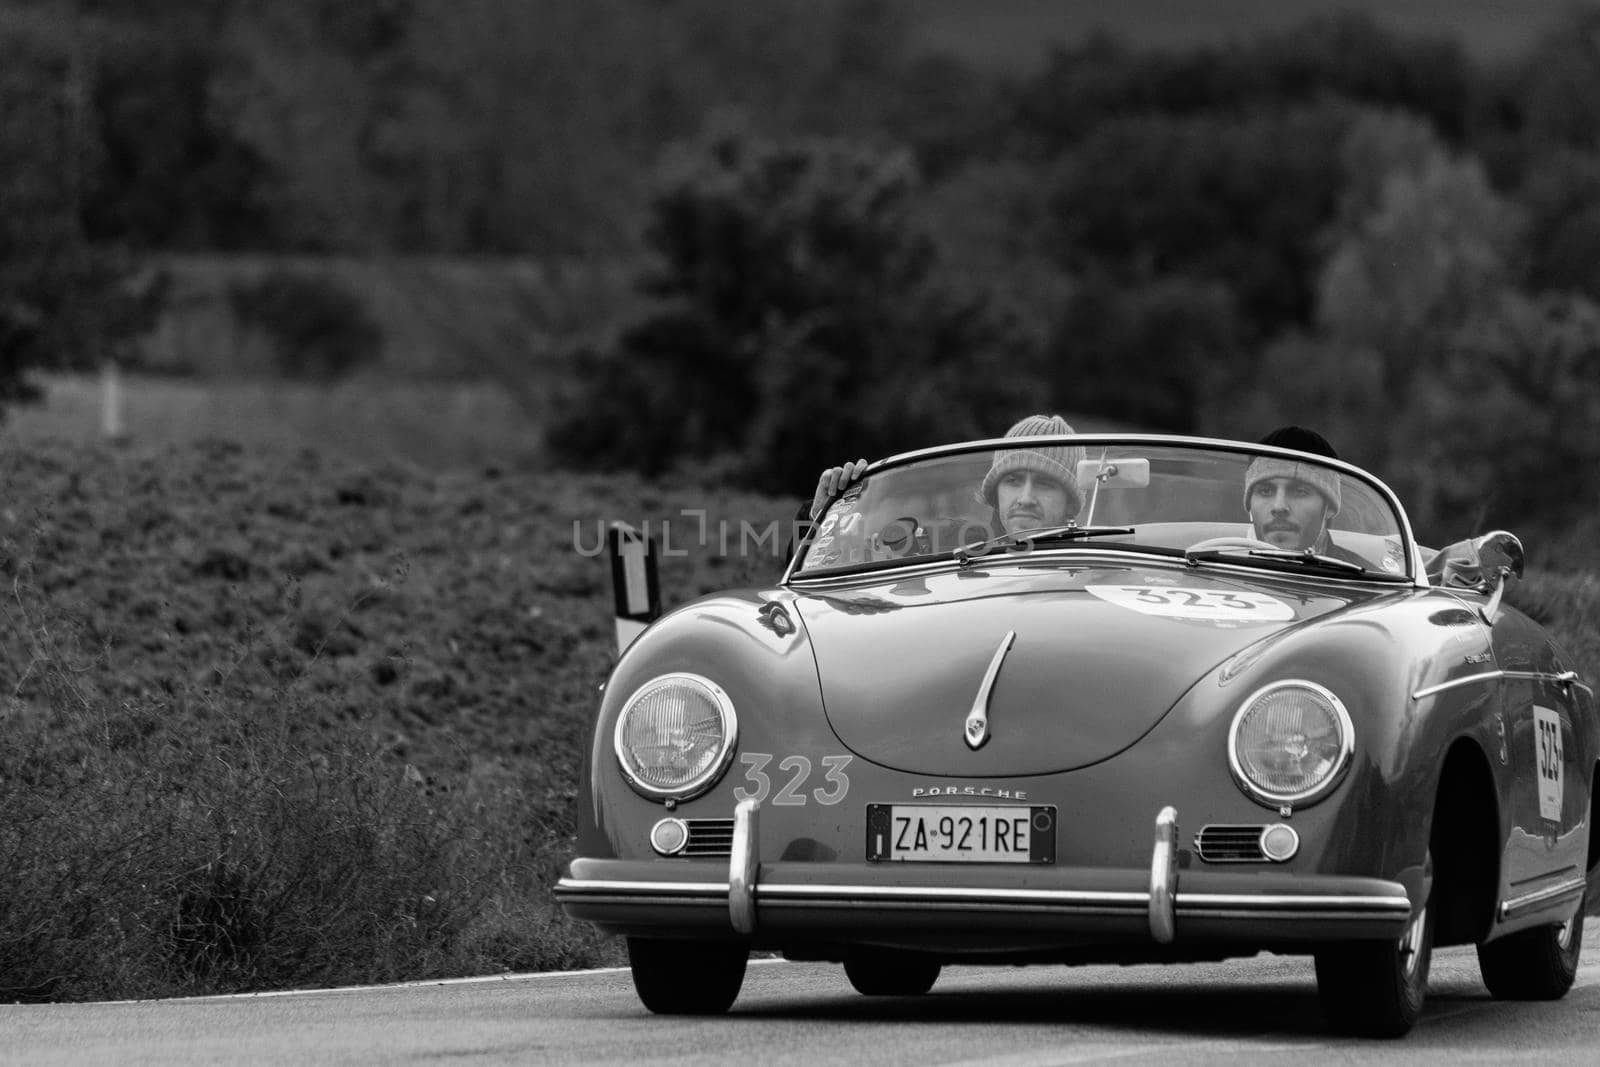 PORSCHE 356 1500 SPEEDSTER 1955 on an old racing car in rally Mille Miglia 2020 the famous italian historical race (1927-1957 by massimocampanari